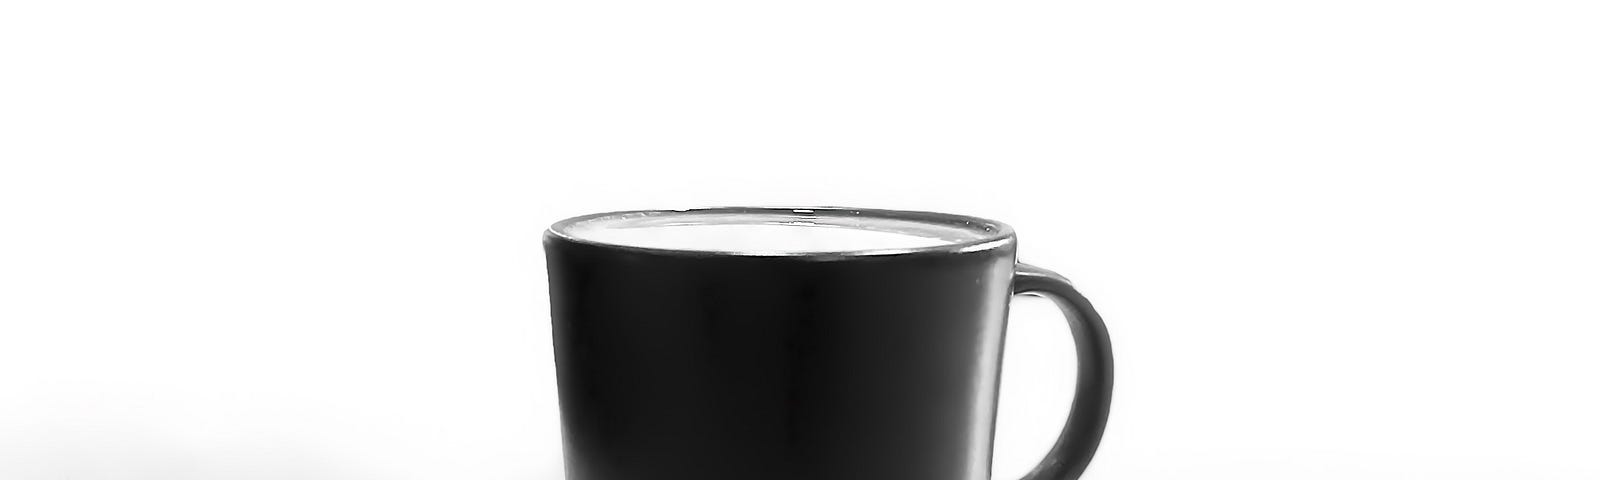 Image of a black mug on a white surface with blank background and a shadow in front of the mug.